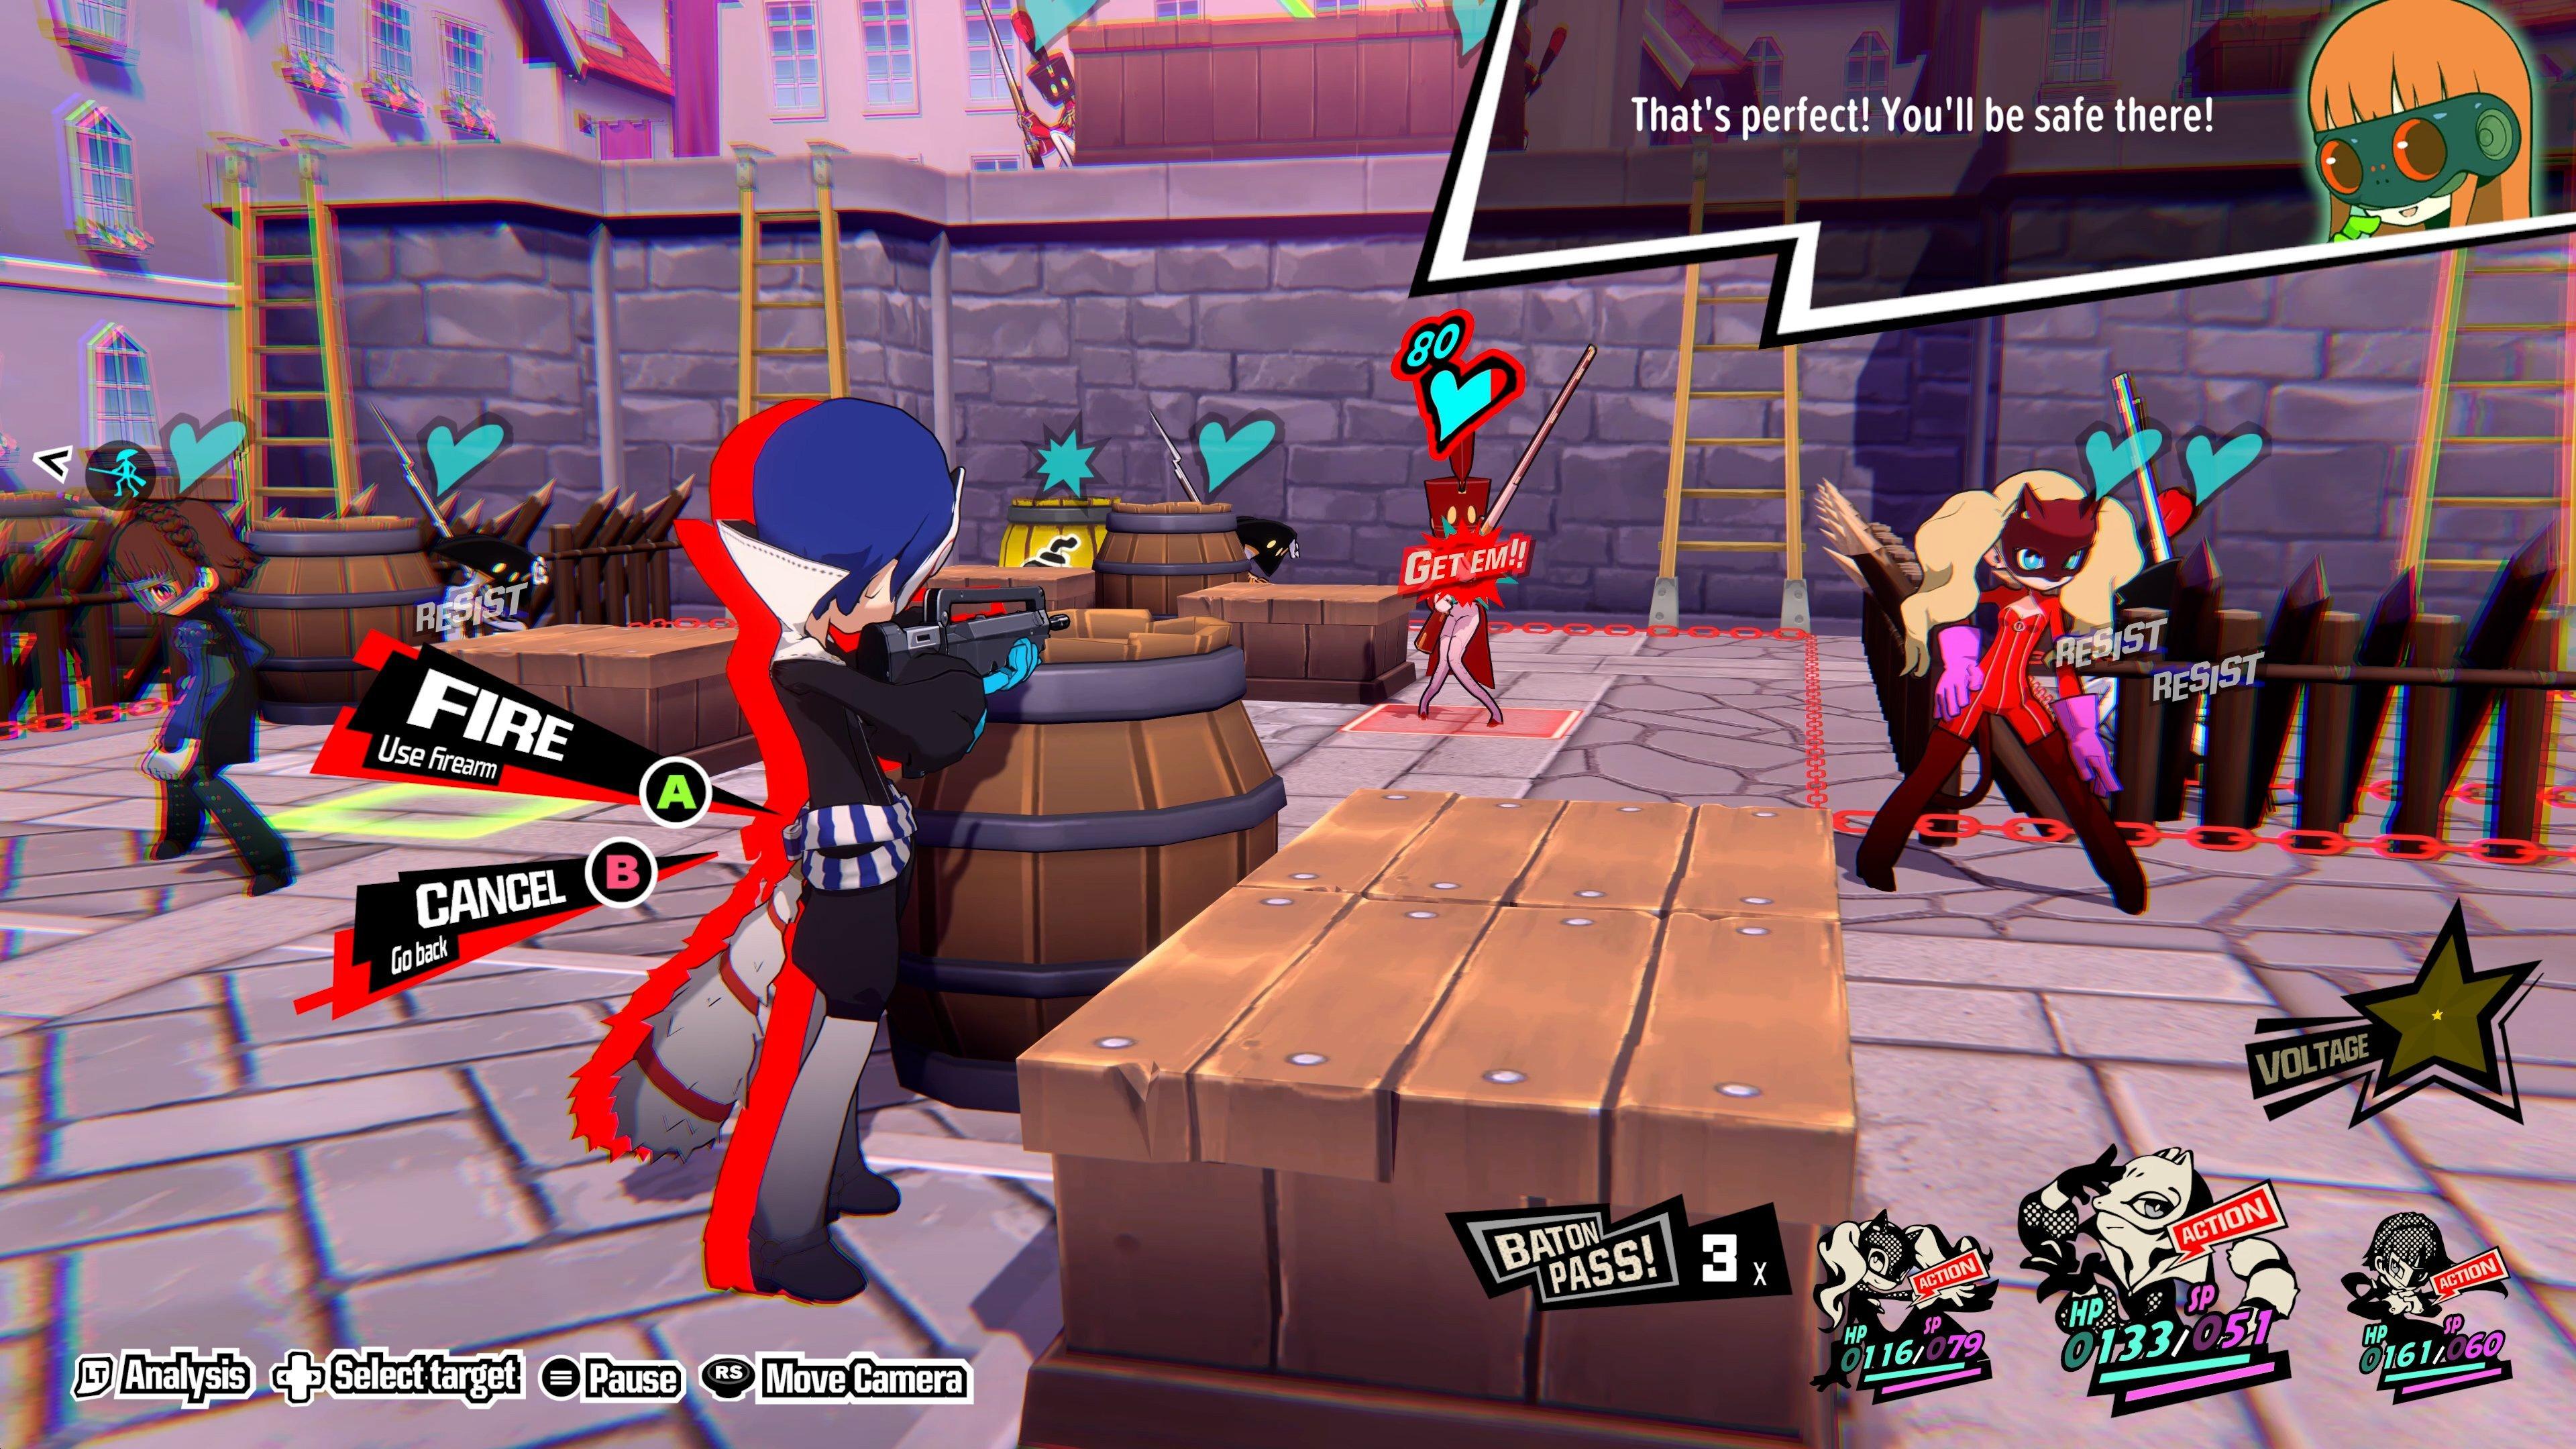 Persona 5 Tactica Has A Launch-Day Edition Exclusive To GameStop - GameSpot